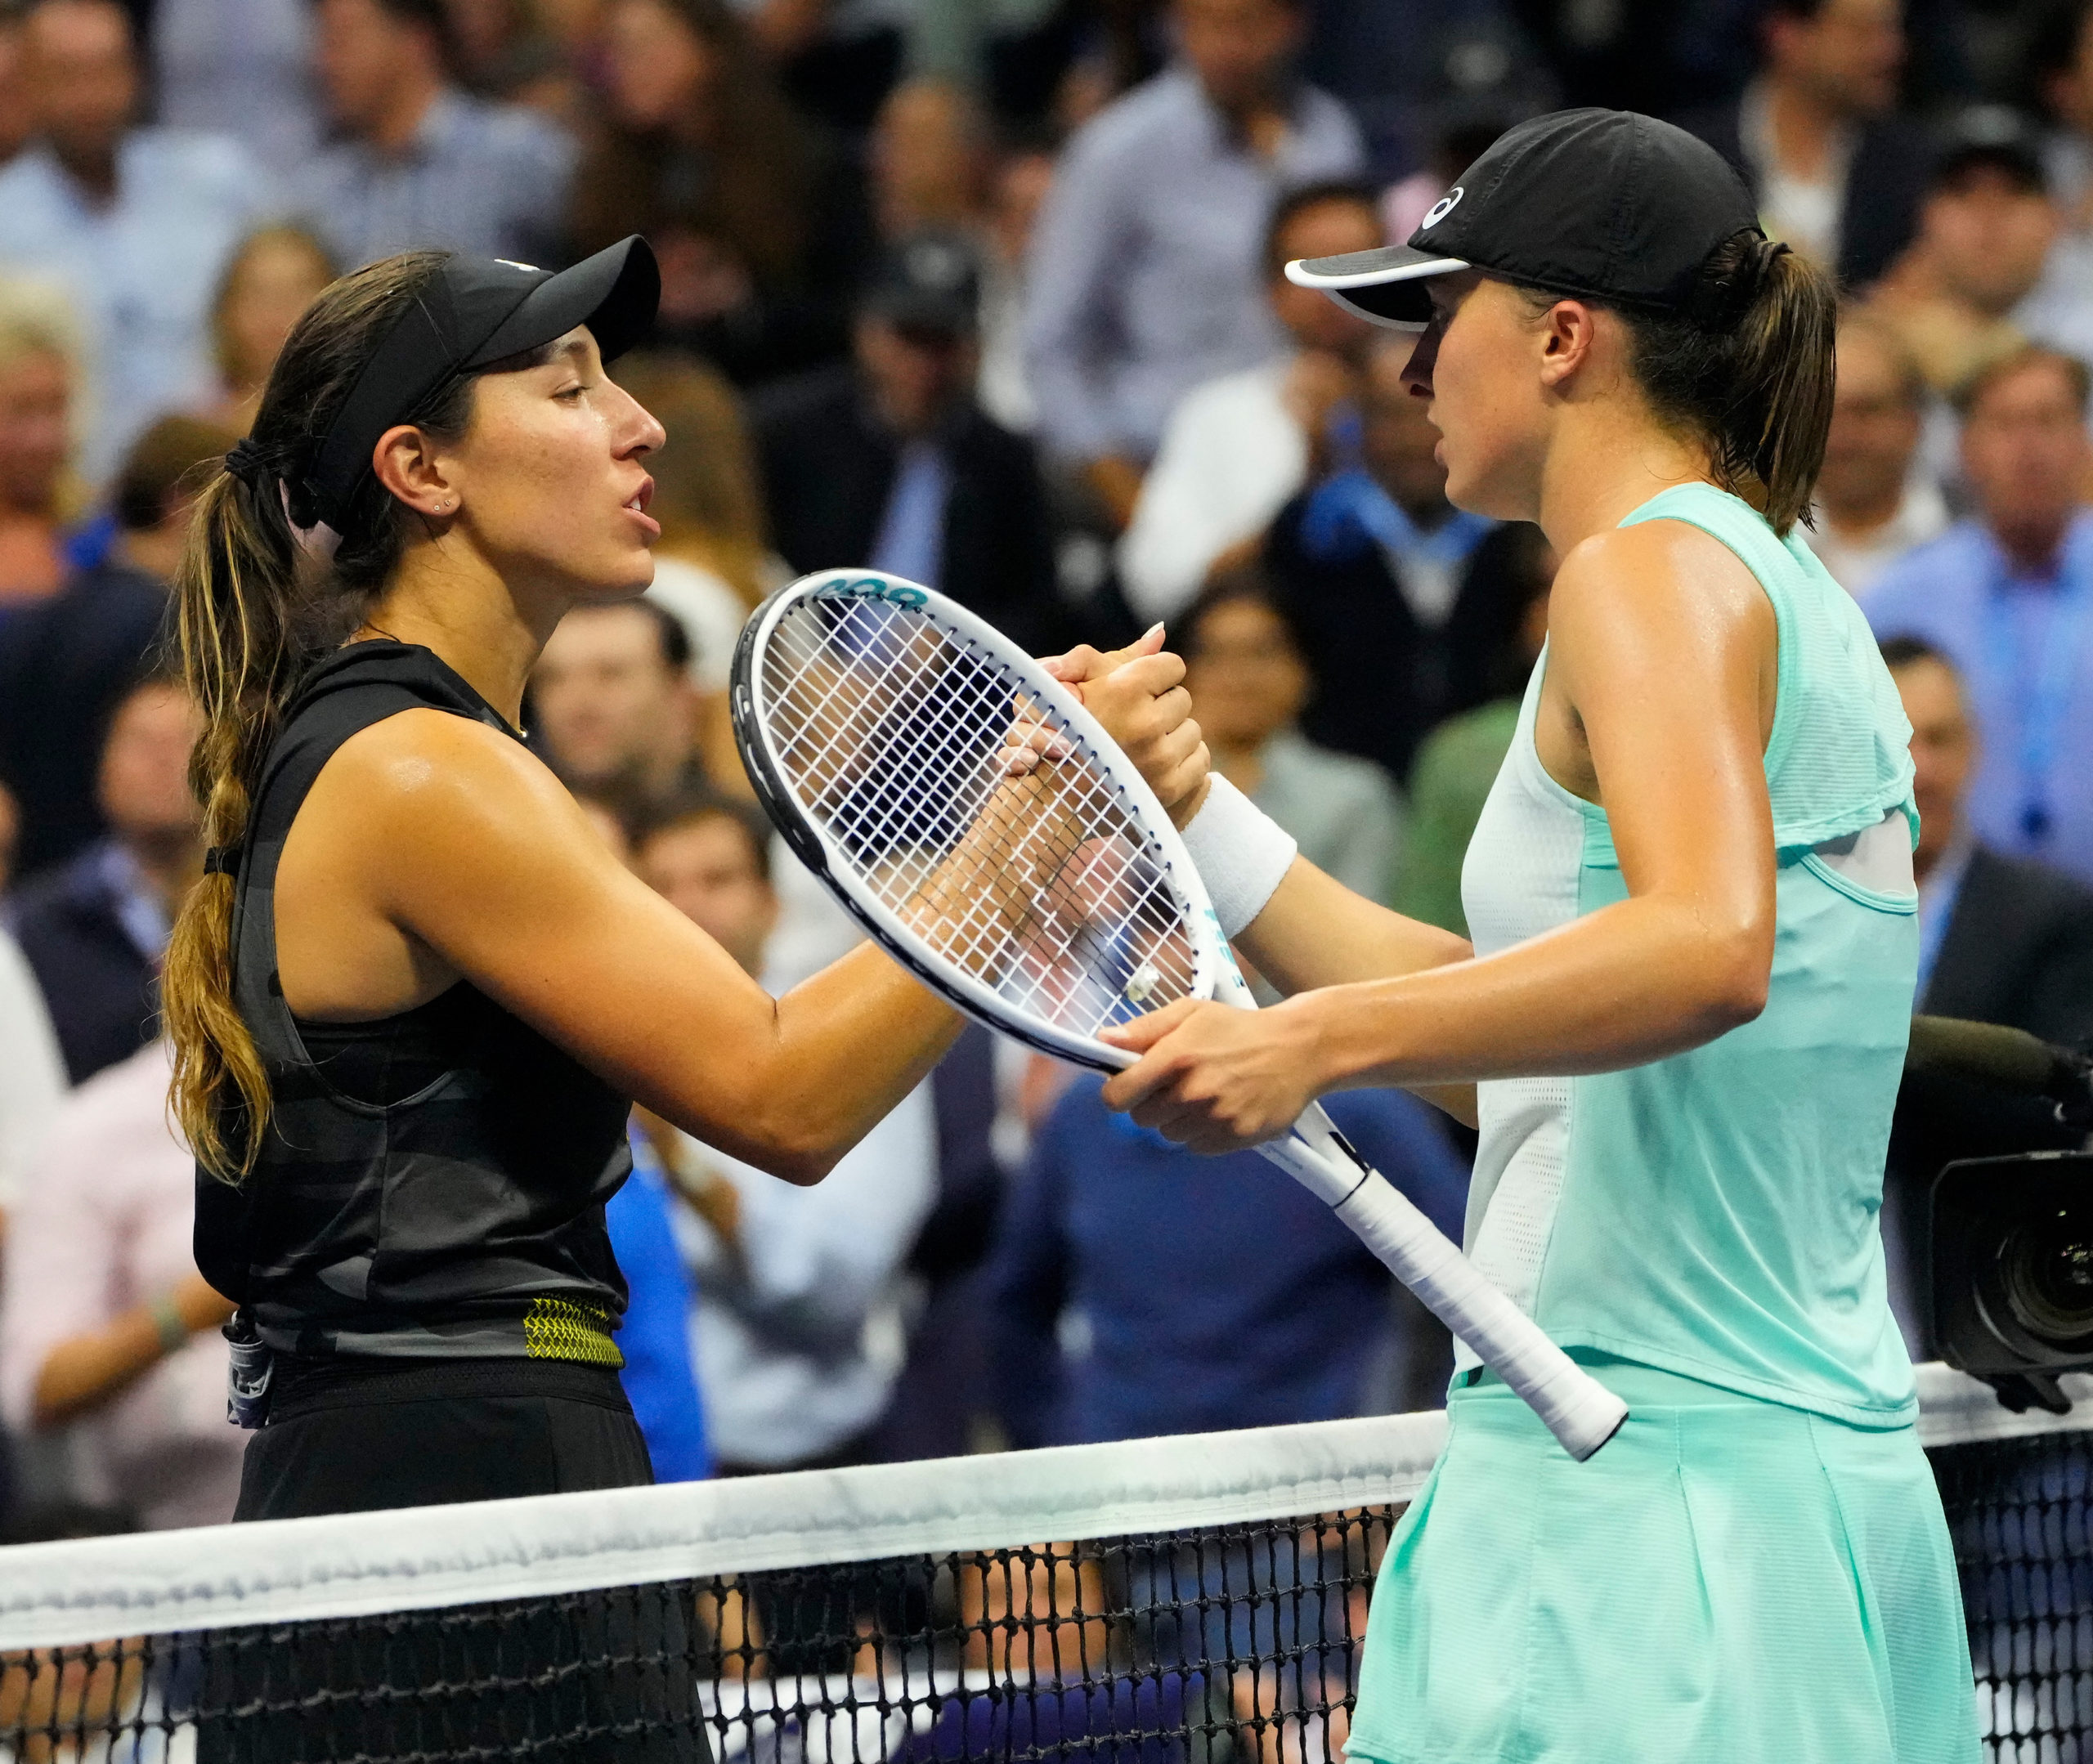  Iga Swiatek of Poland  (right) after beating Jessica Pegula of the USA on day ten of the 2022 U.S. Open tennis tournament at USTA Billie Jean King National Tennis Center